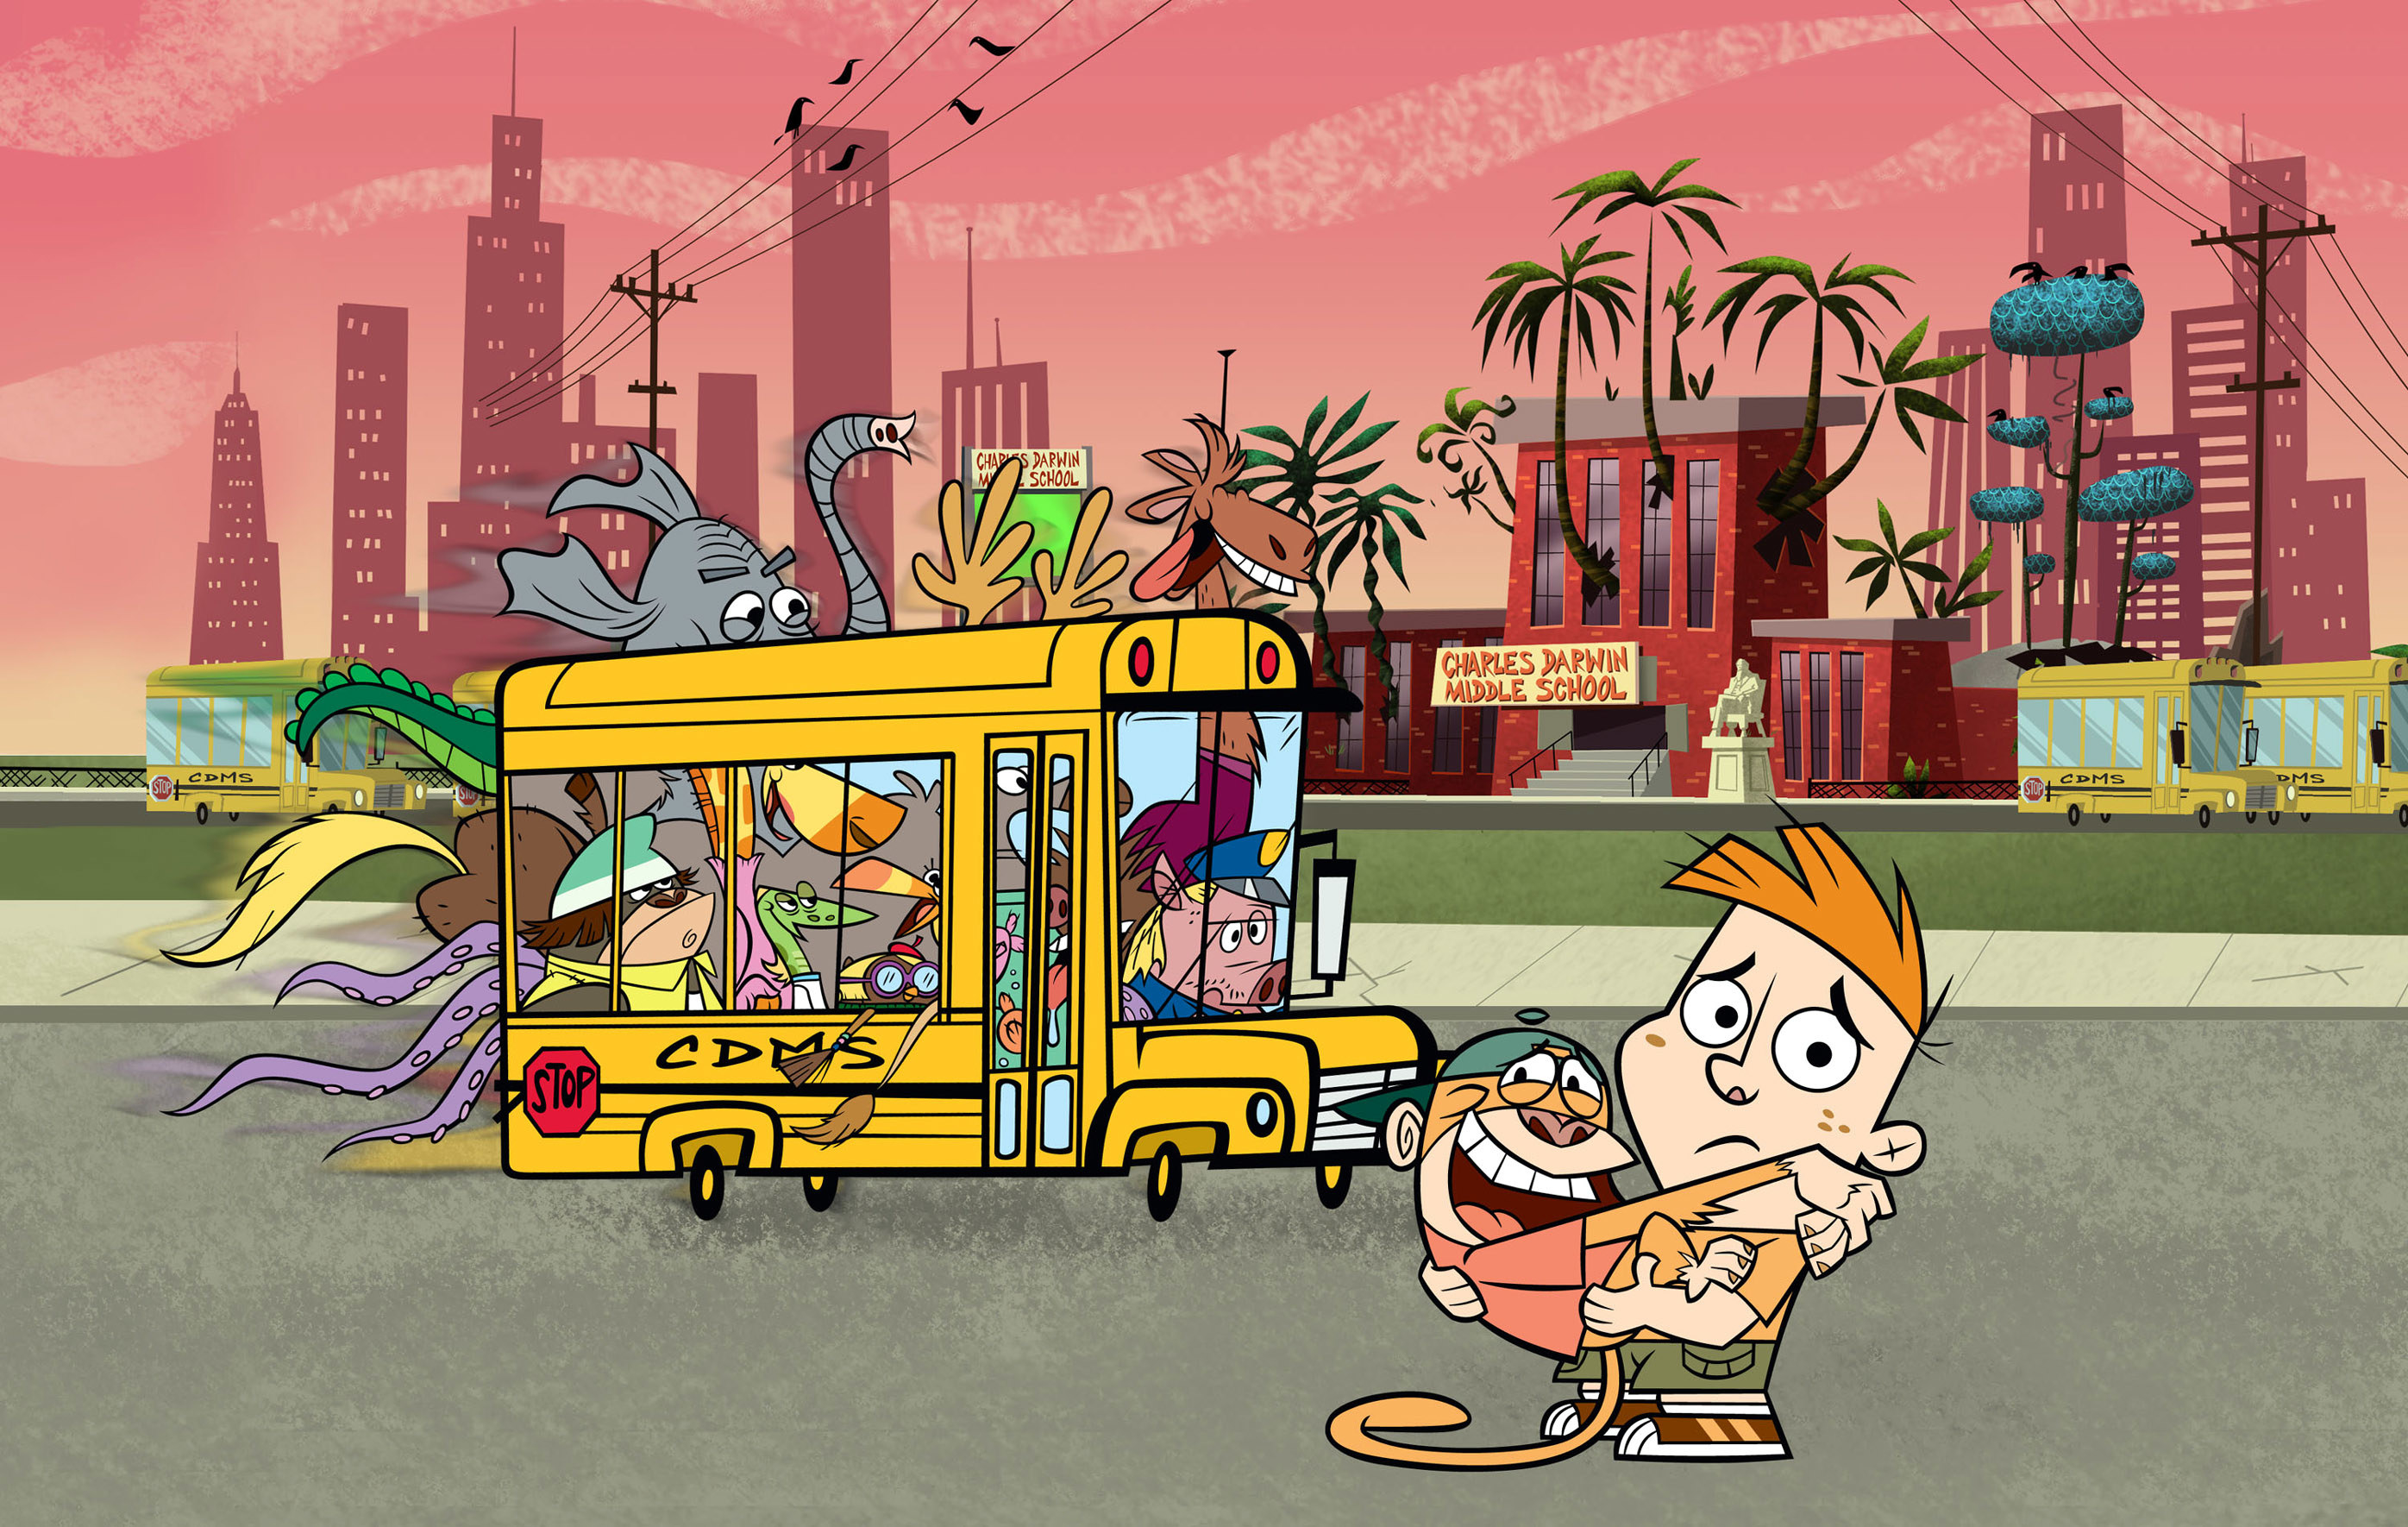 An anxious looking boy, Adam, holds a monkey in a backwards cap, standing in front of a school bus full of animals including a pig and an elephant